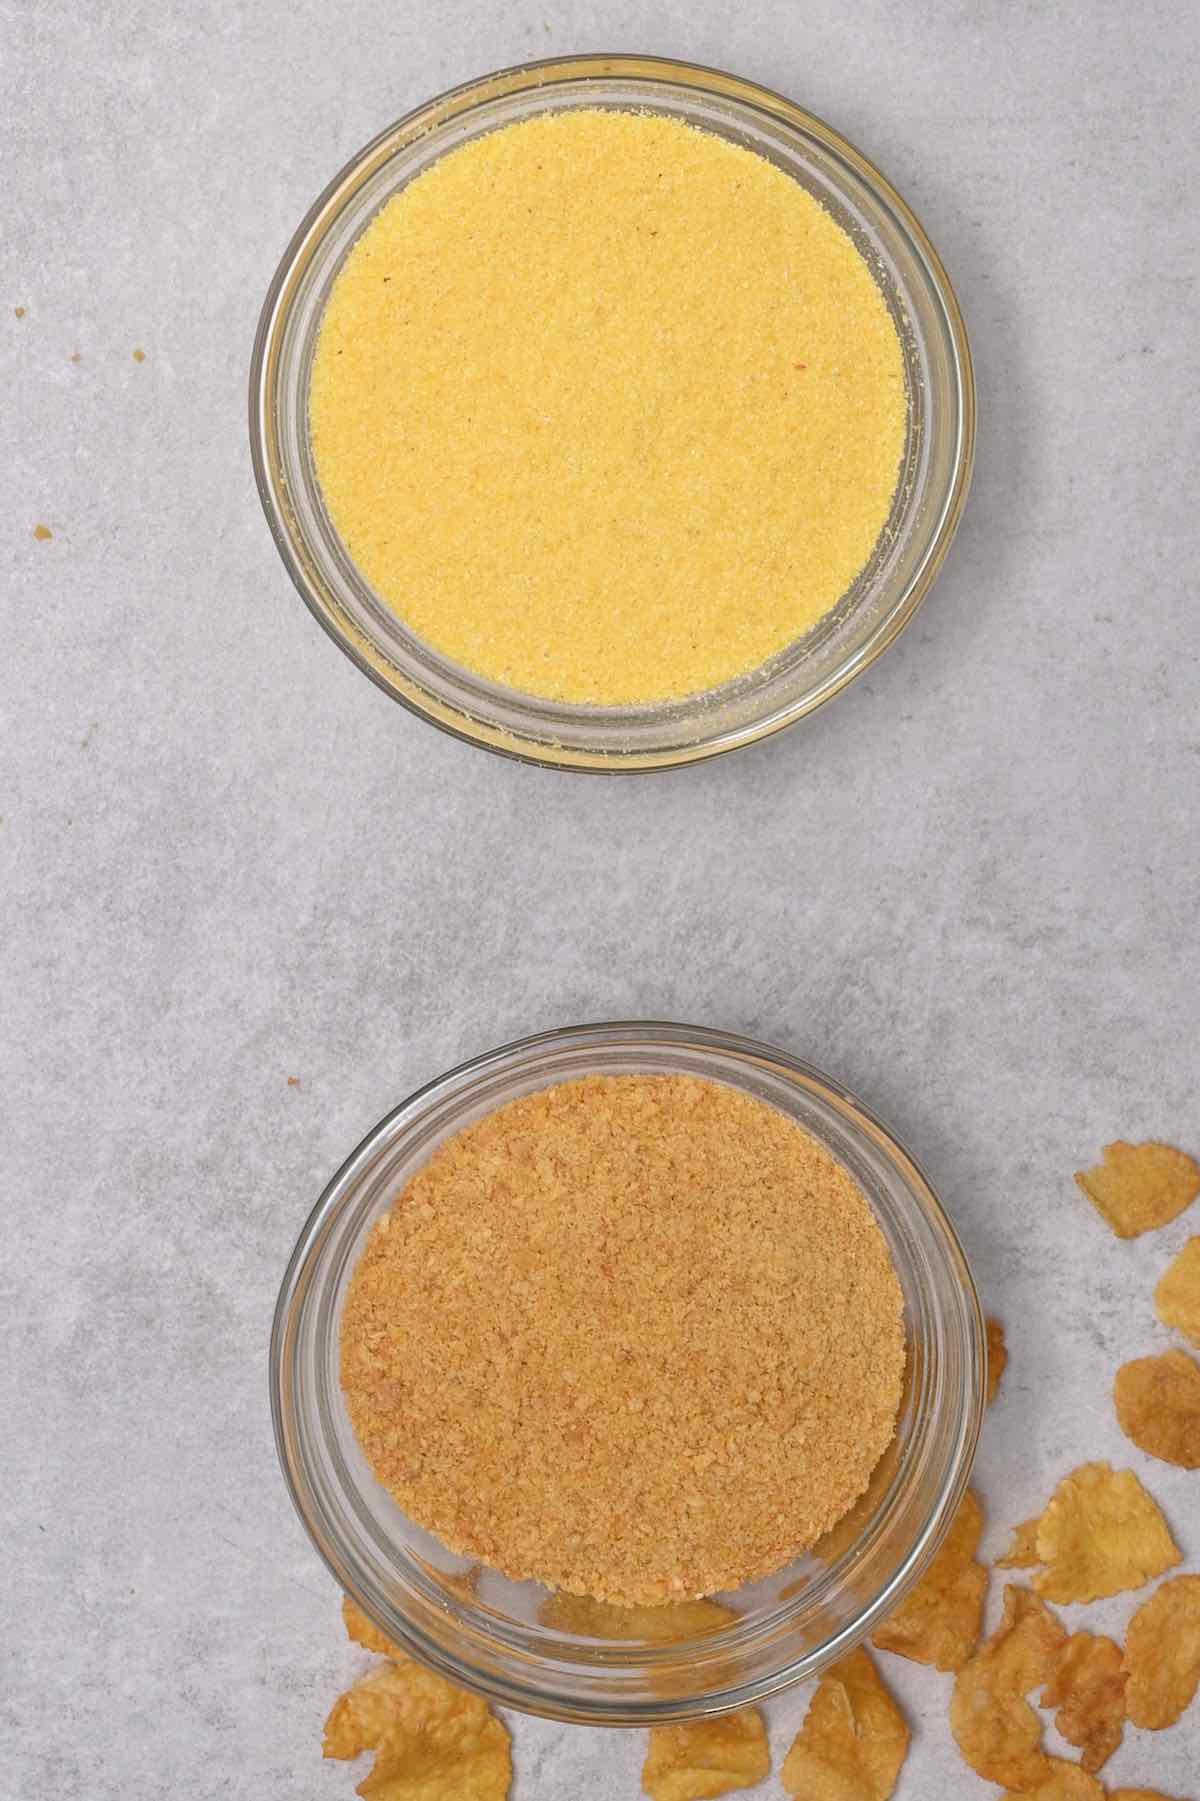 crushed cornflakes next to cornmeal in glass bowl